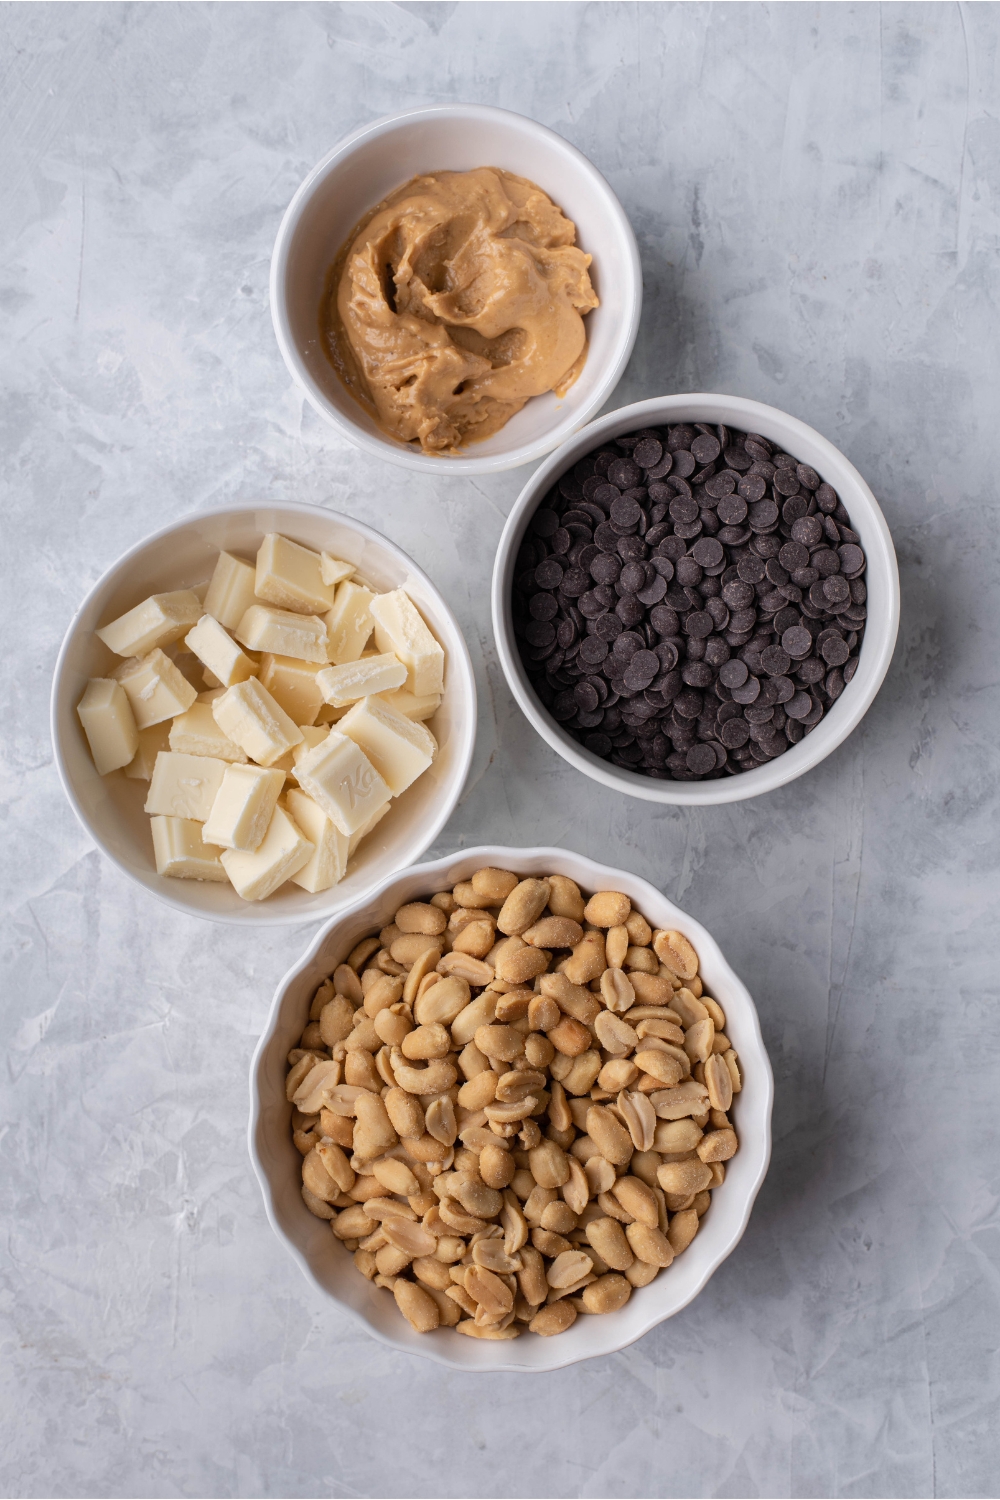 An assortment of ingredients including bowls of chocolate chips, peanuts, white chocolate, and peanut butter.